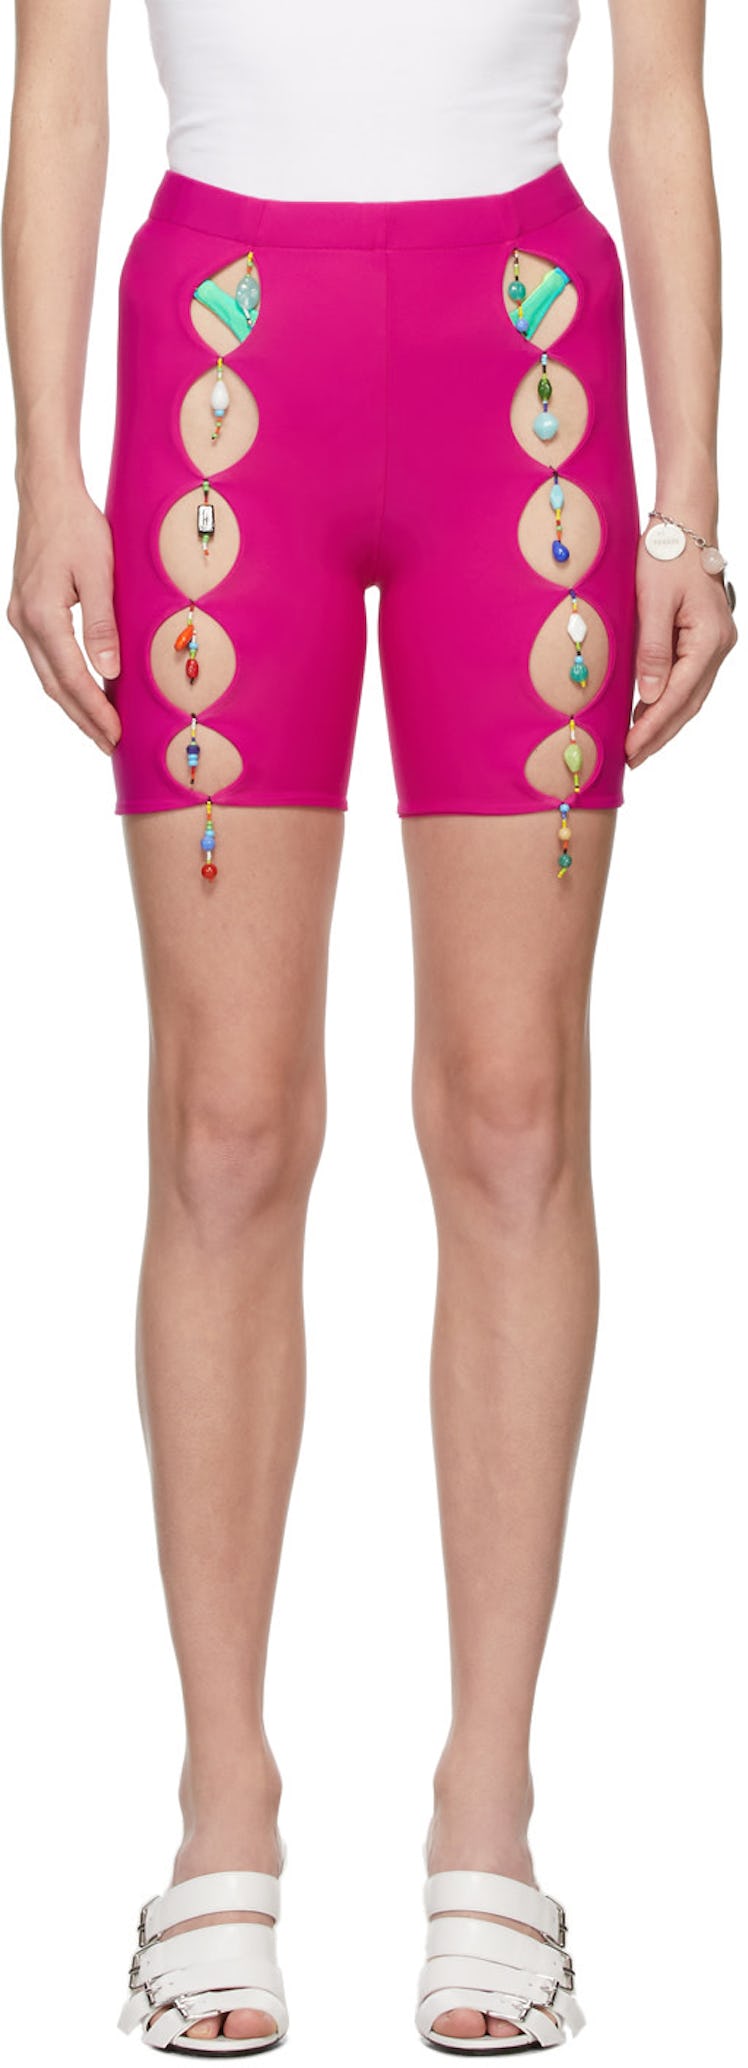 Marshall Columbia Pink Bead Cut Out Bike Shorts